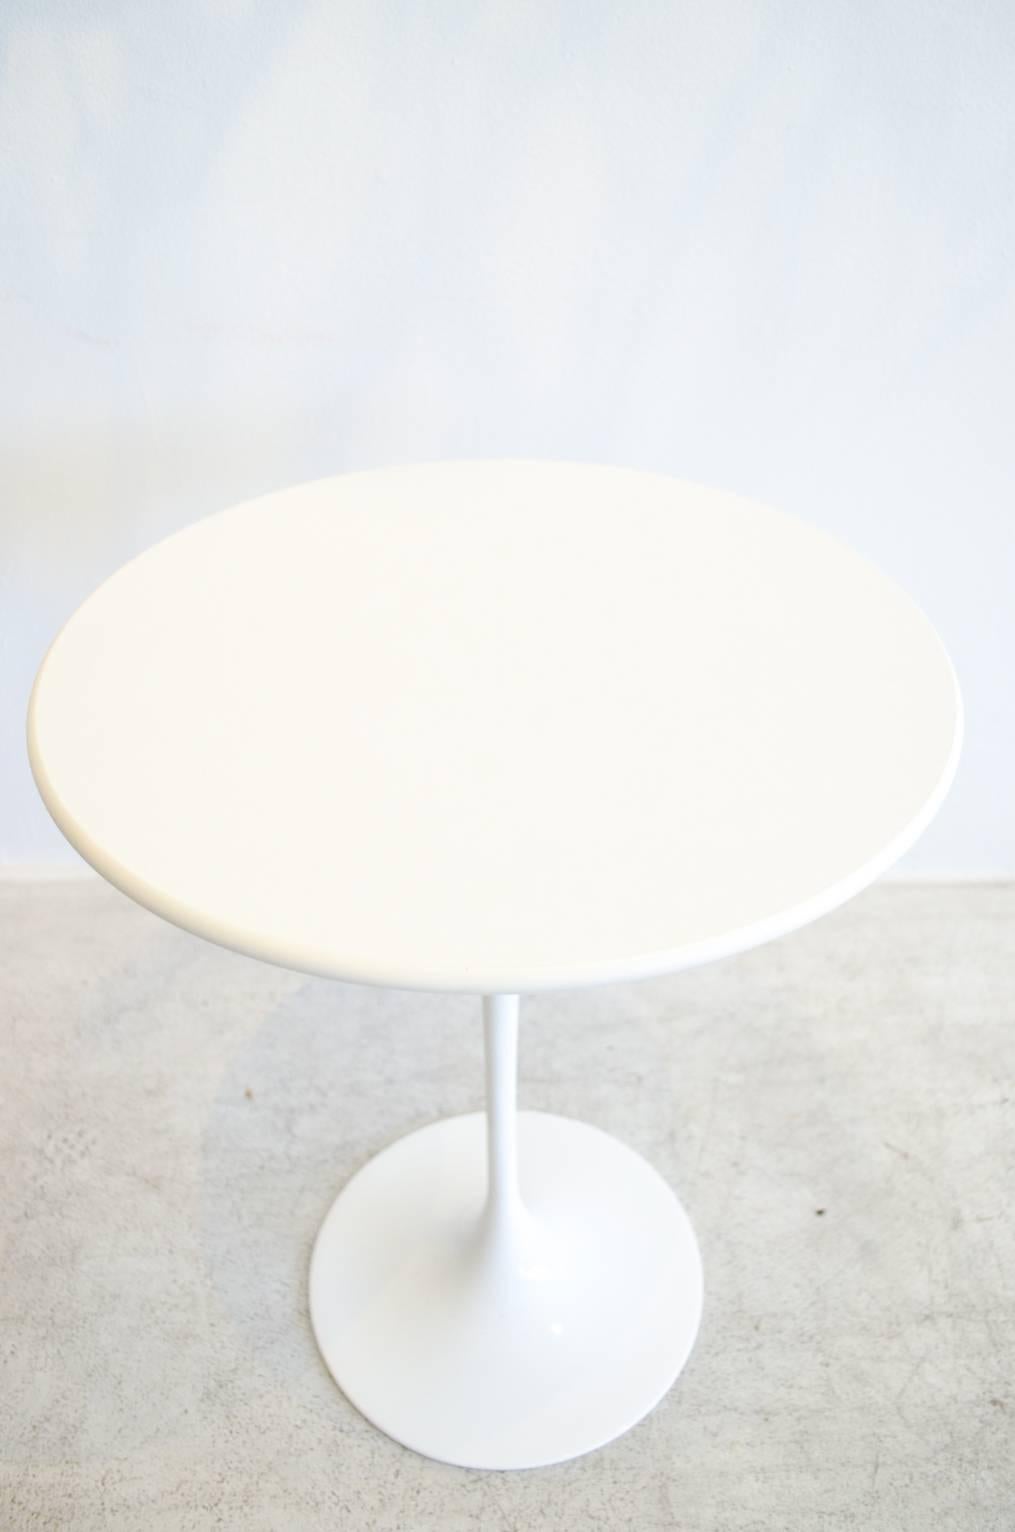 Original Saarinen for Knoll tulip side table in excellent vintage condition.  White laminate top, one small wear mark, as shown, otherwise perfect.  Cast iron base is excellent with no chips or marks.

Measures 16' Diameter x 20